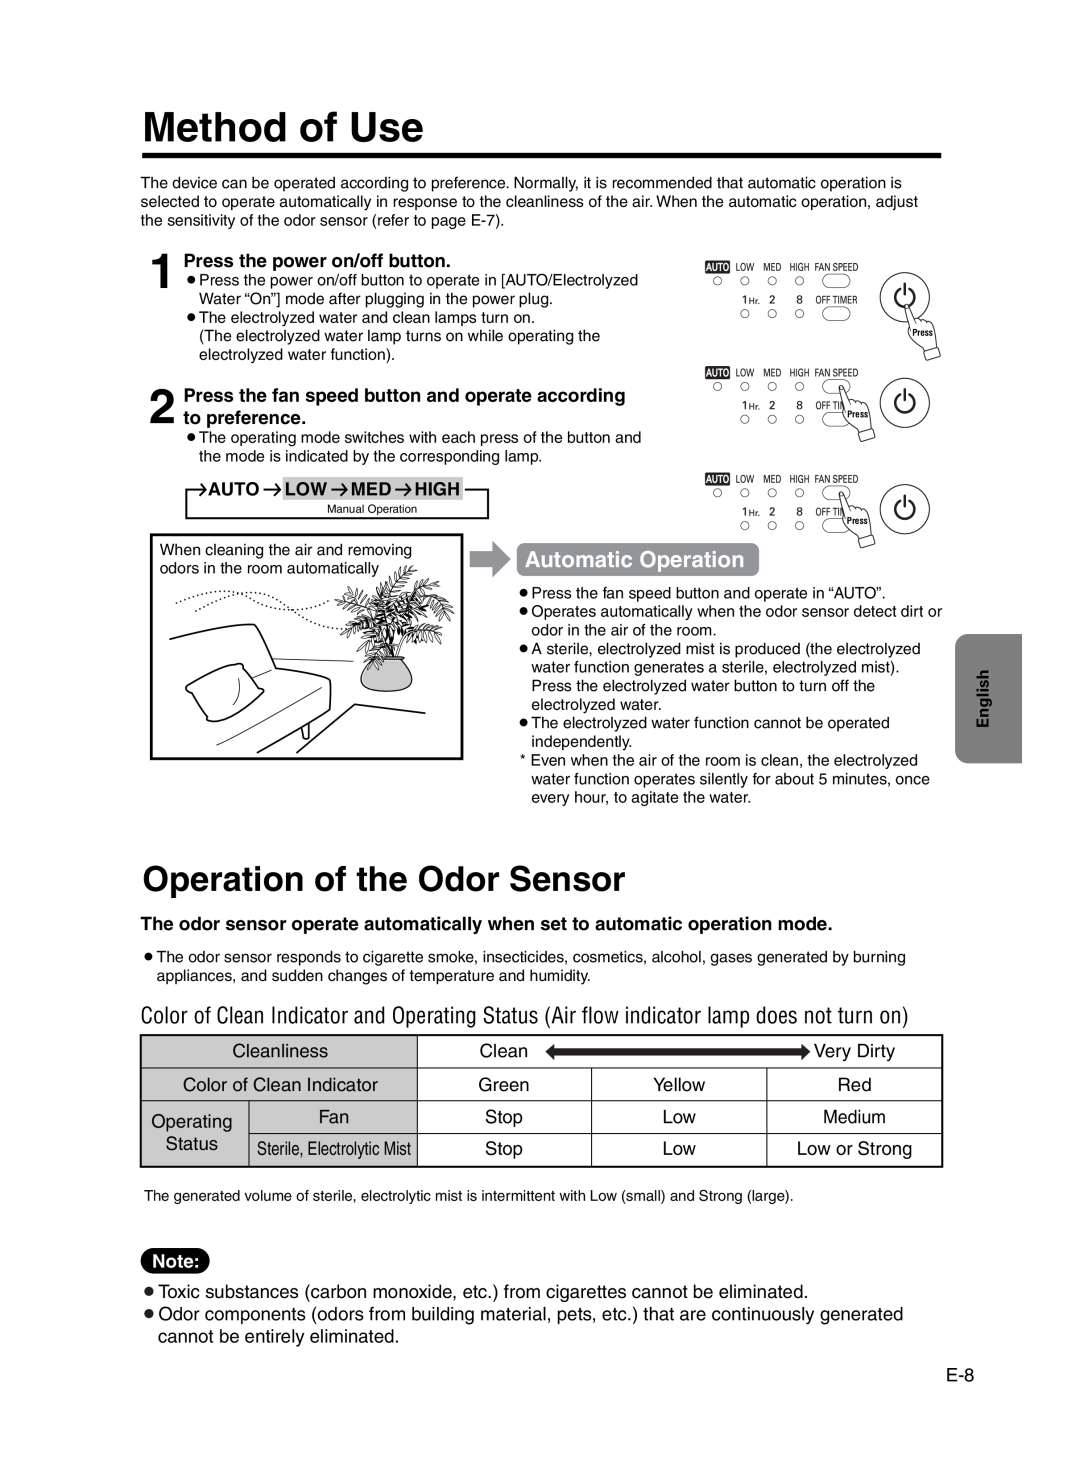 Sanyo ABC-VW24A Method of Use, Operation of the Odor Sensor, Automatic Operation, Press the power on/off button 